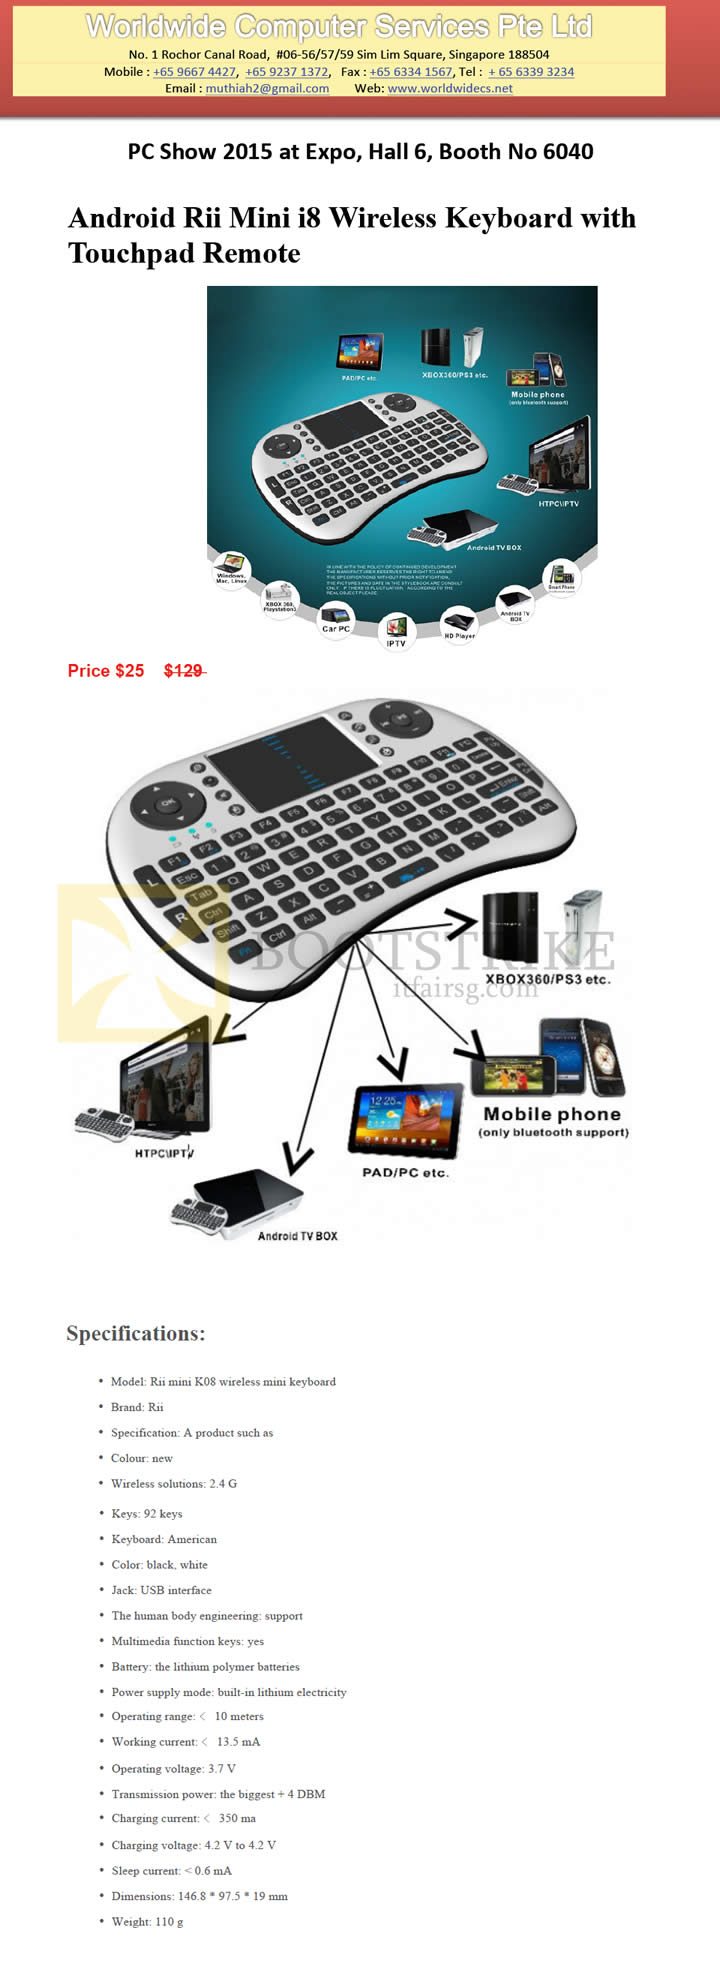 PC SHOW 2015 price list image brochure of Worldwide Computer Services Android Rii Mini Wireless Mini Keyboard